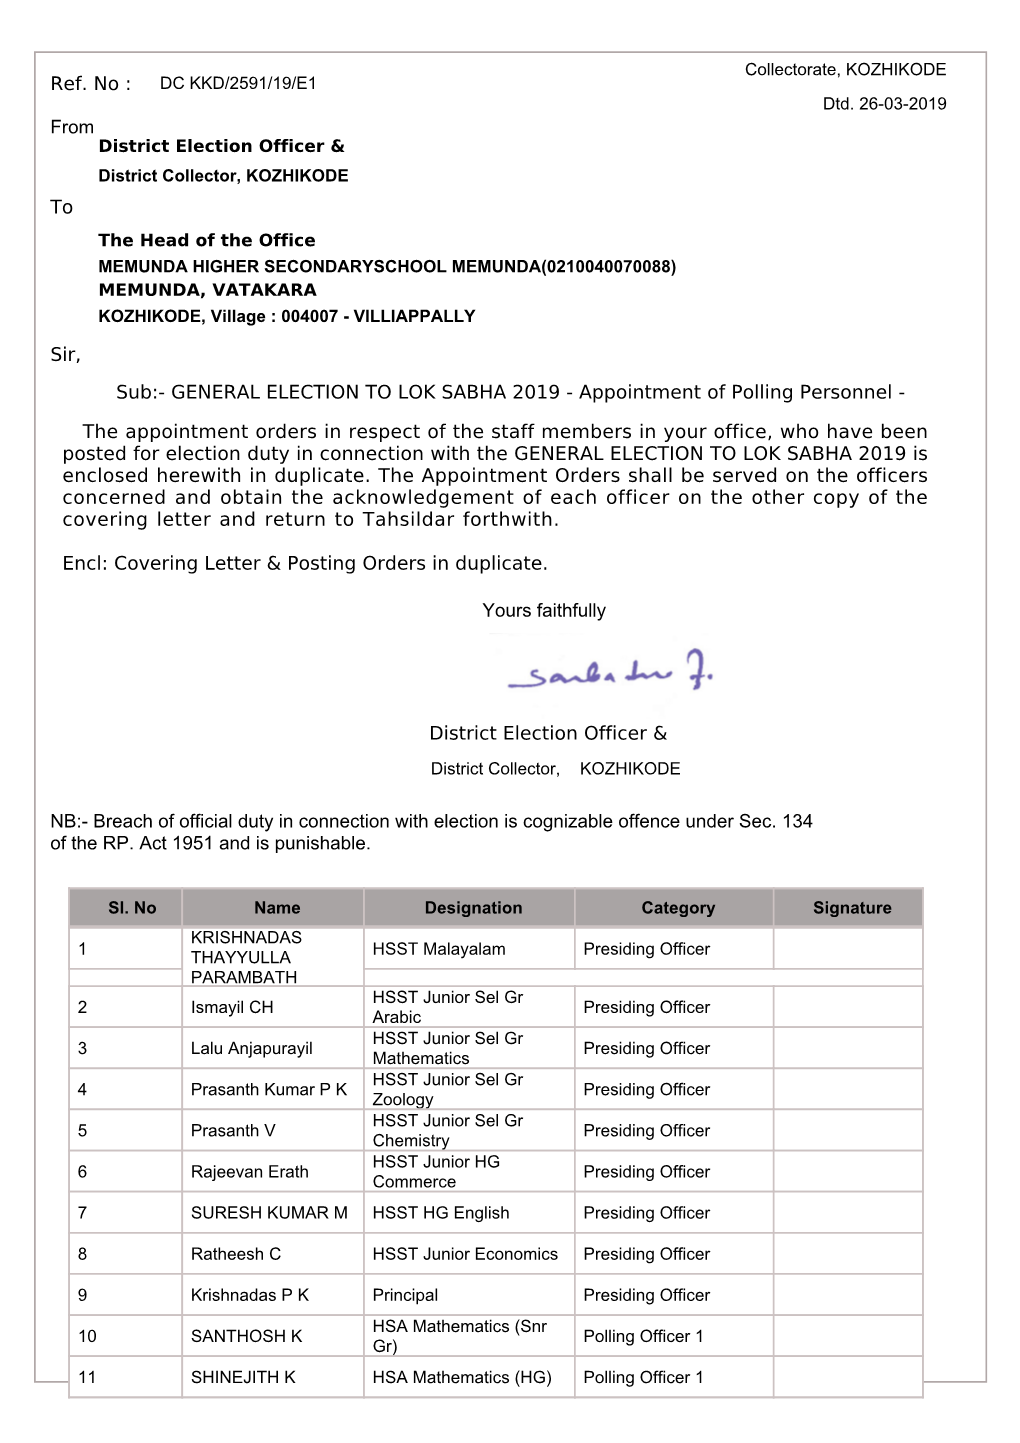 GENERAL ELECTION to LOK SABHA 2019 - Appointment of Polling Personnel